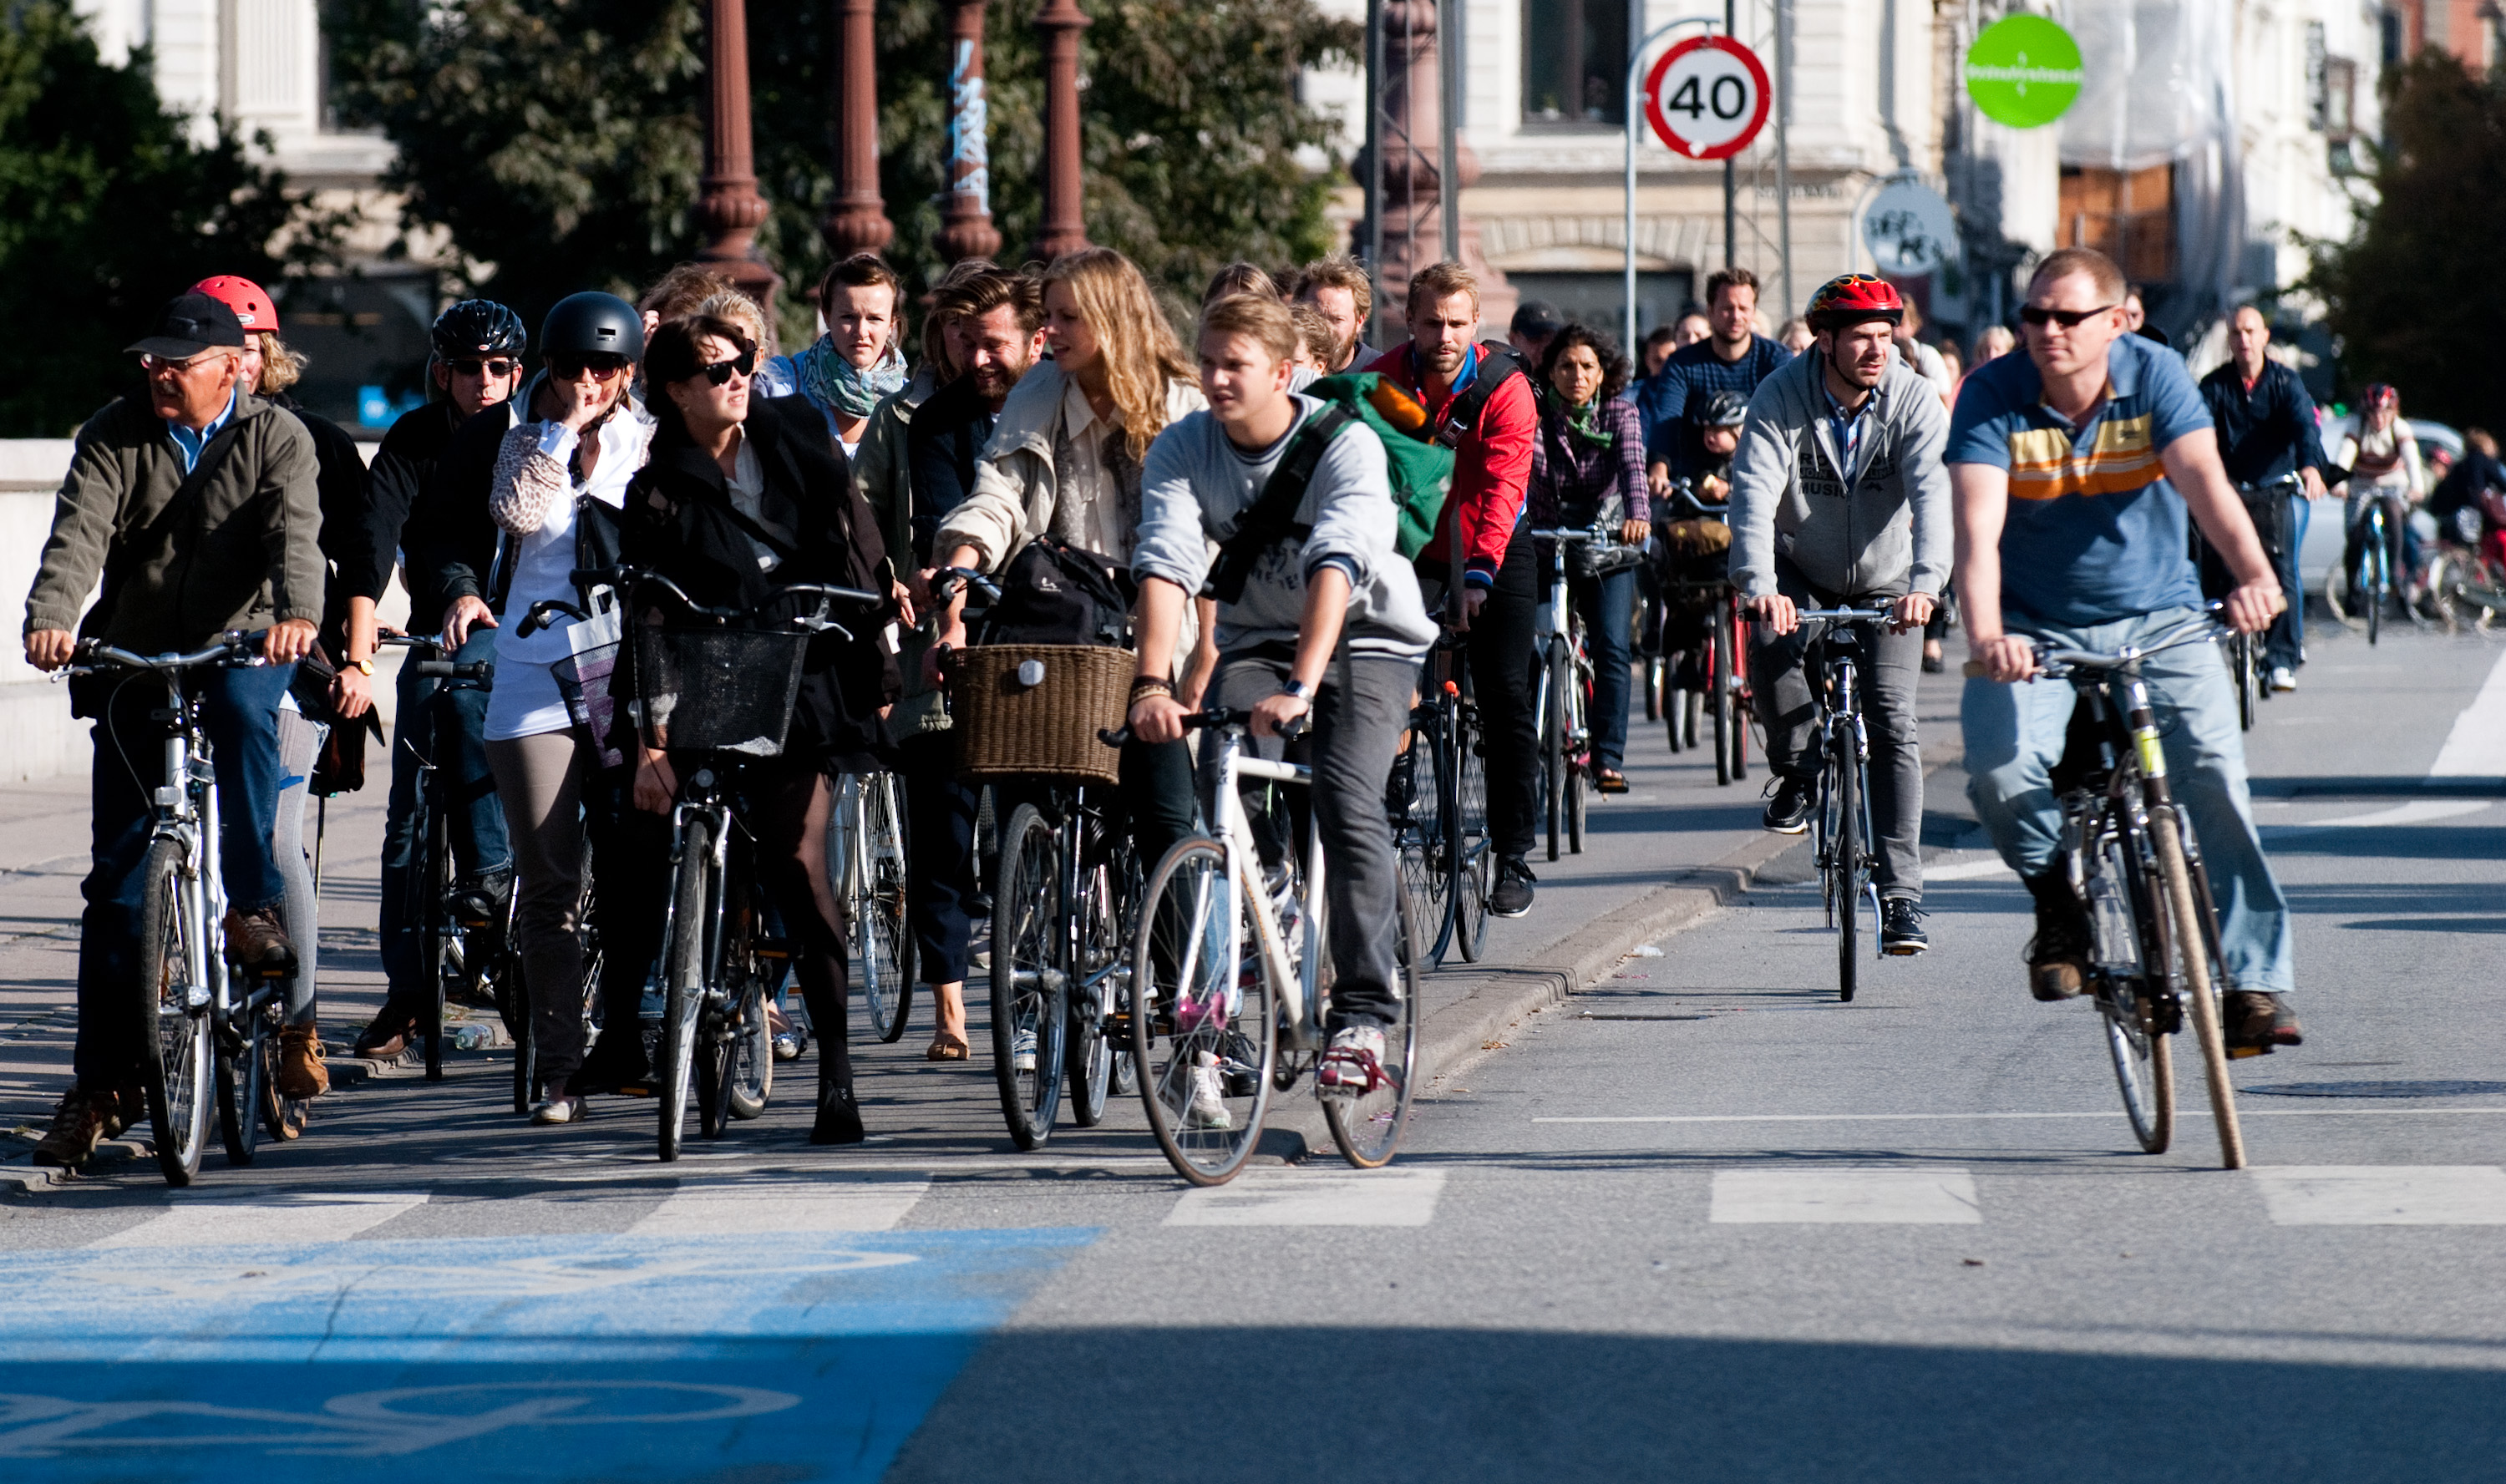 Rush hour in Copenhagen, dominated by cyclists. Photo by user Heb is licensed by CC-BY-SA-3.0.